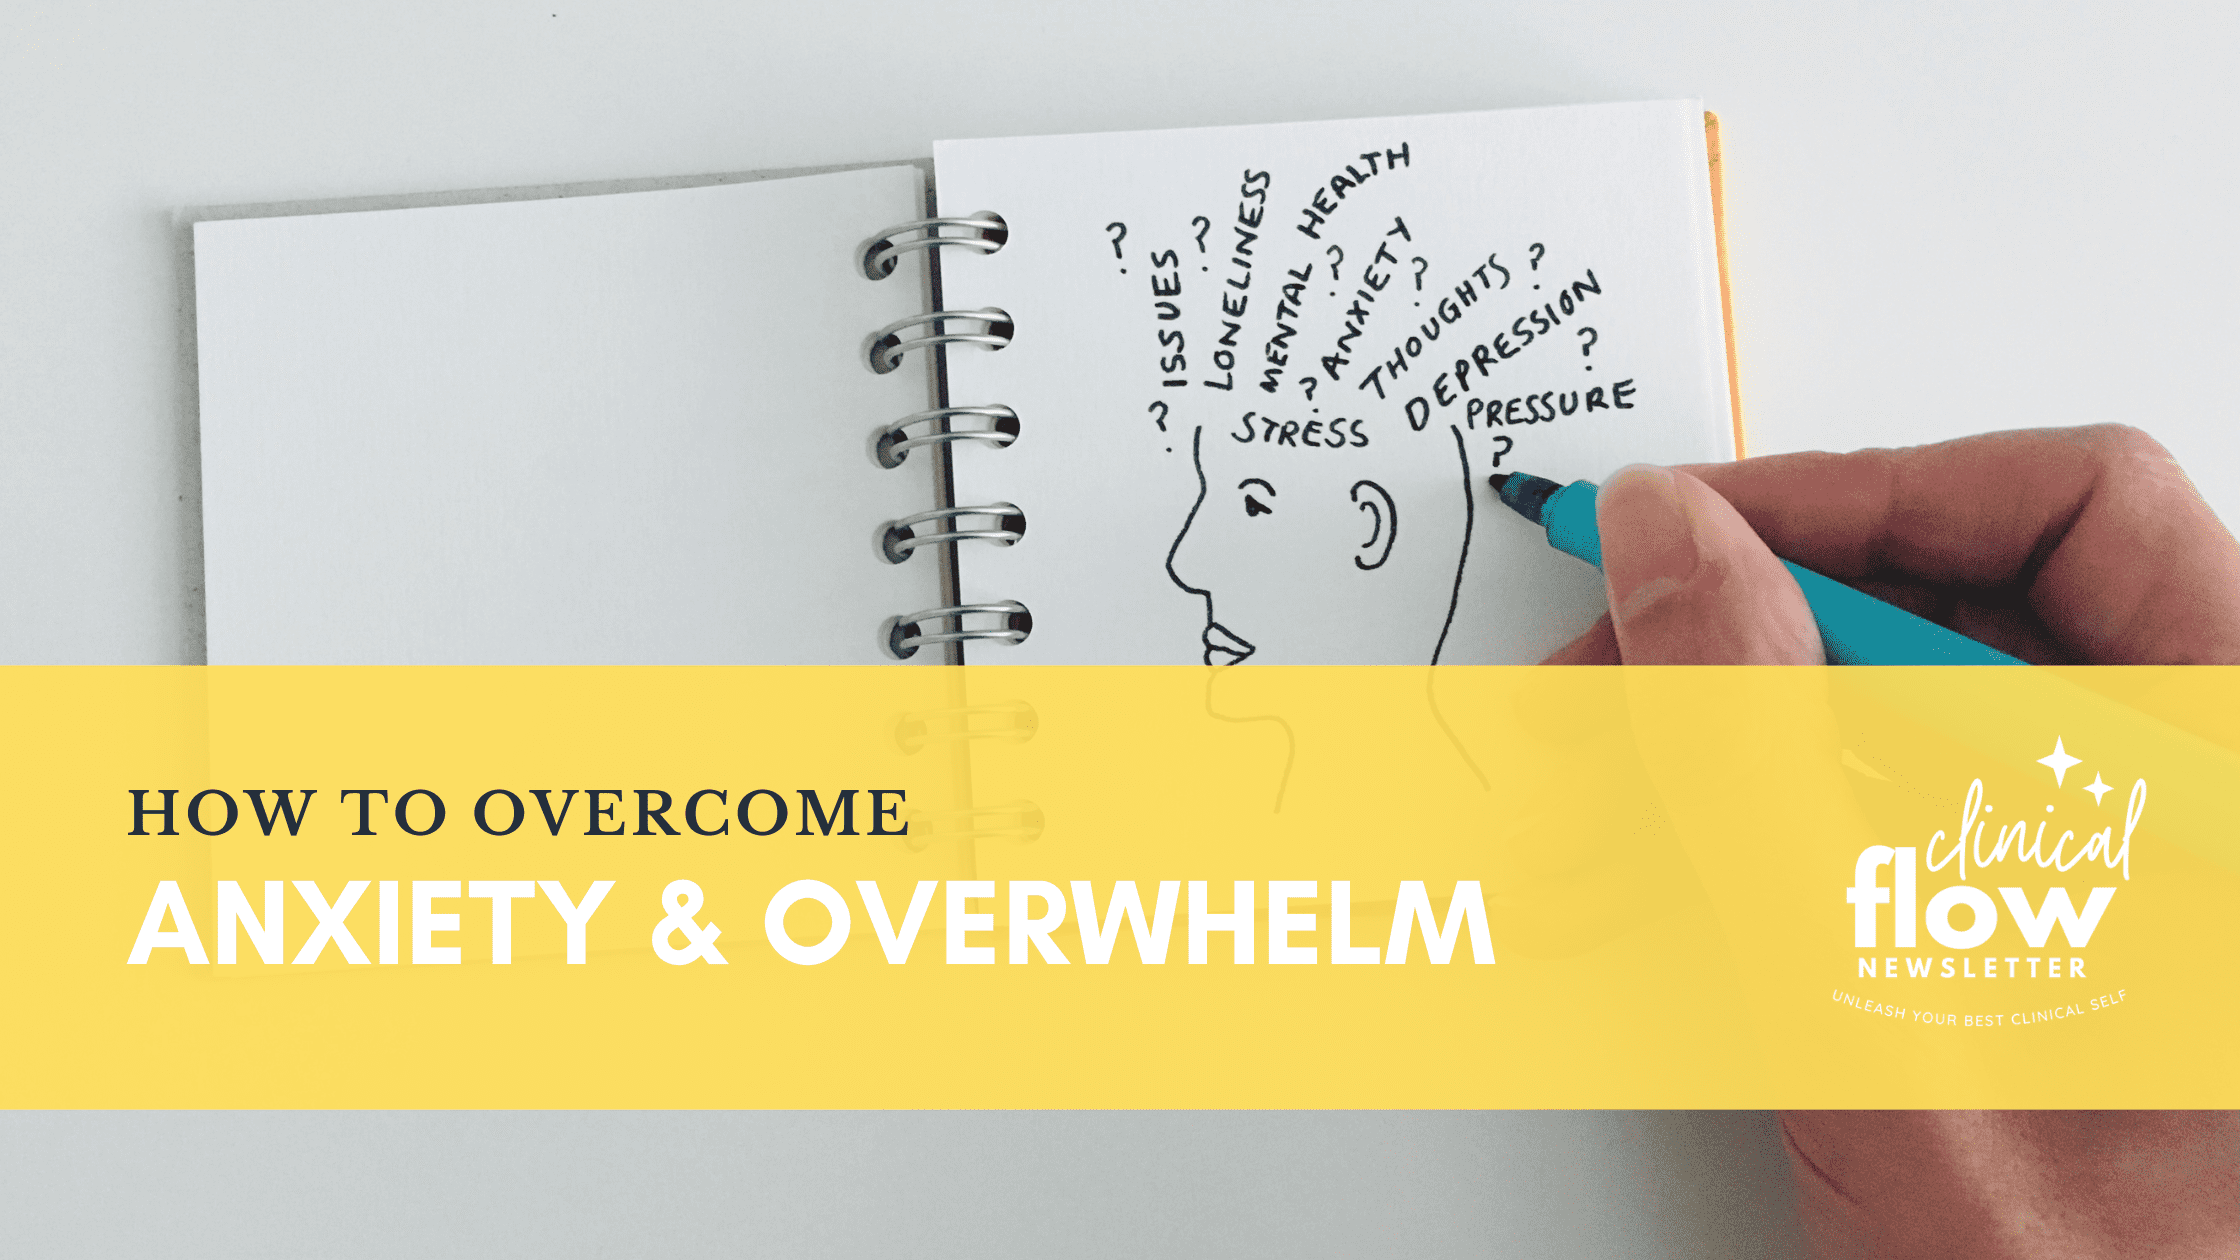 How to overcome anxiety and overwhelm in a clinical setting